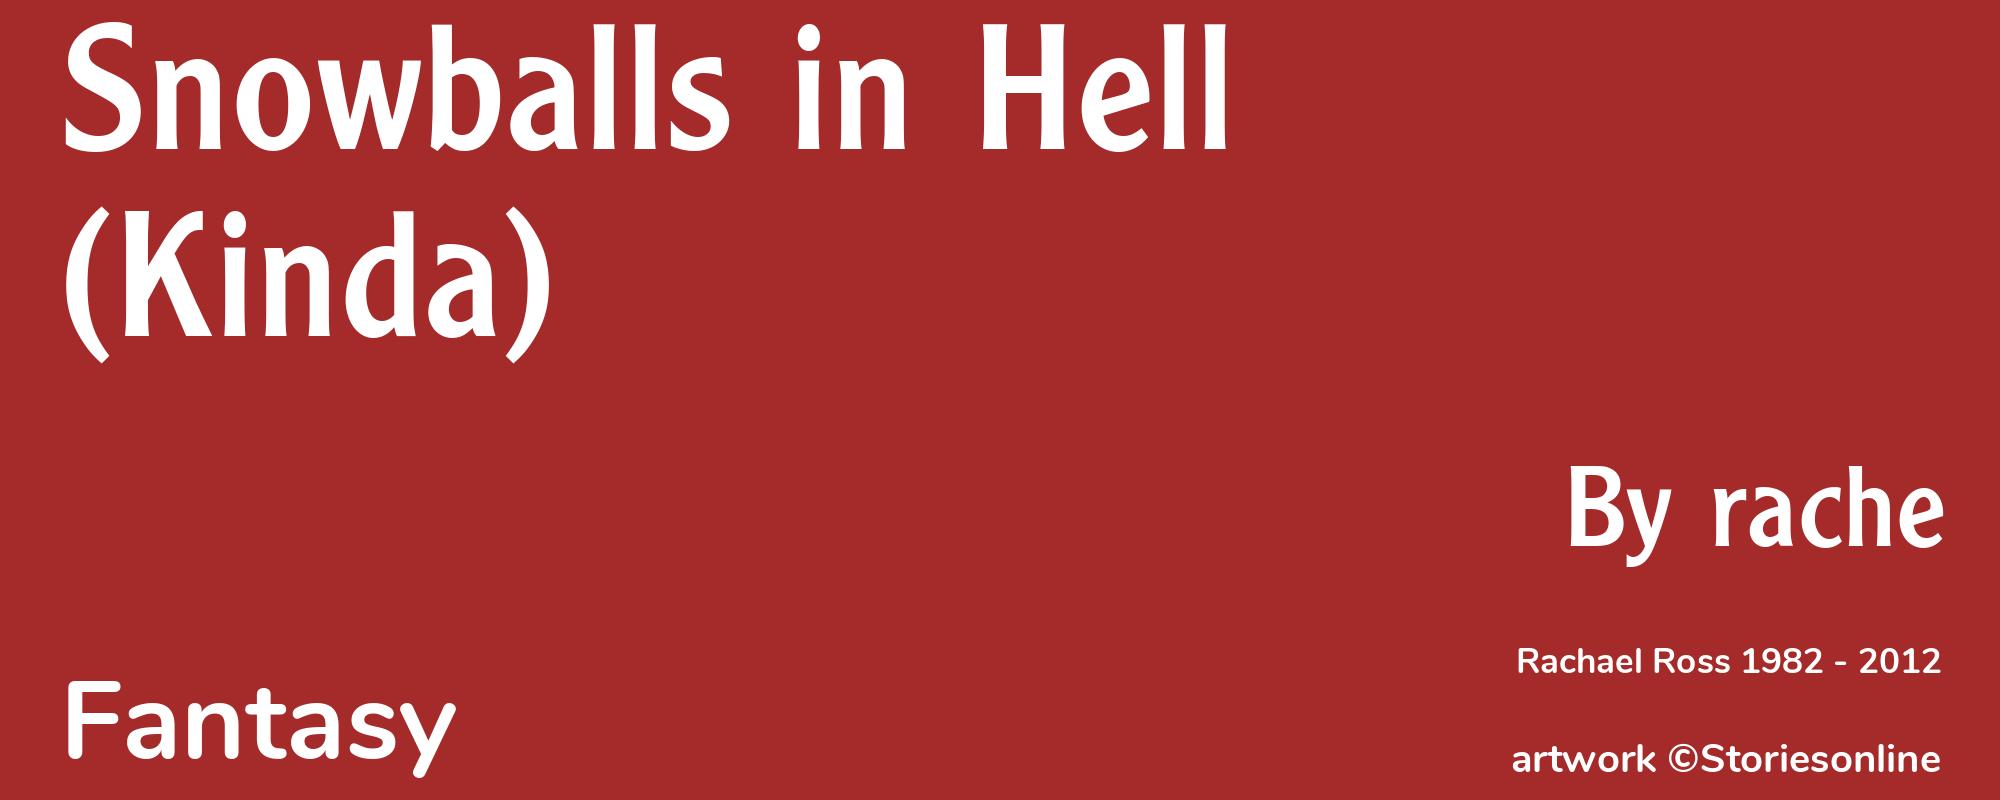 Snowballs in Hell (Kinda) - Cover